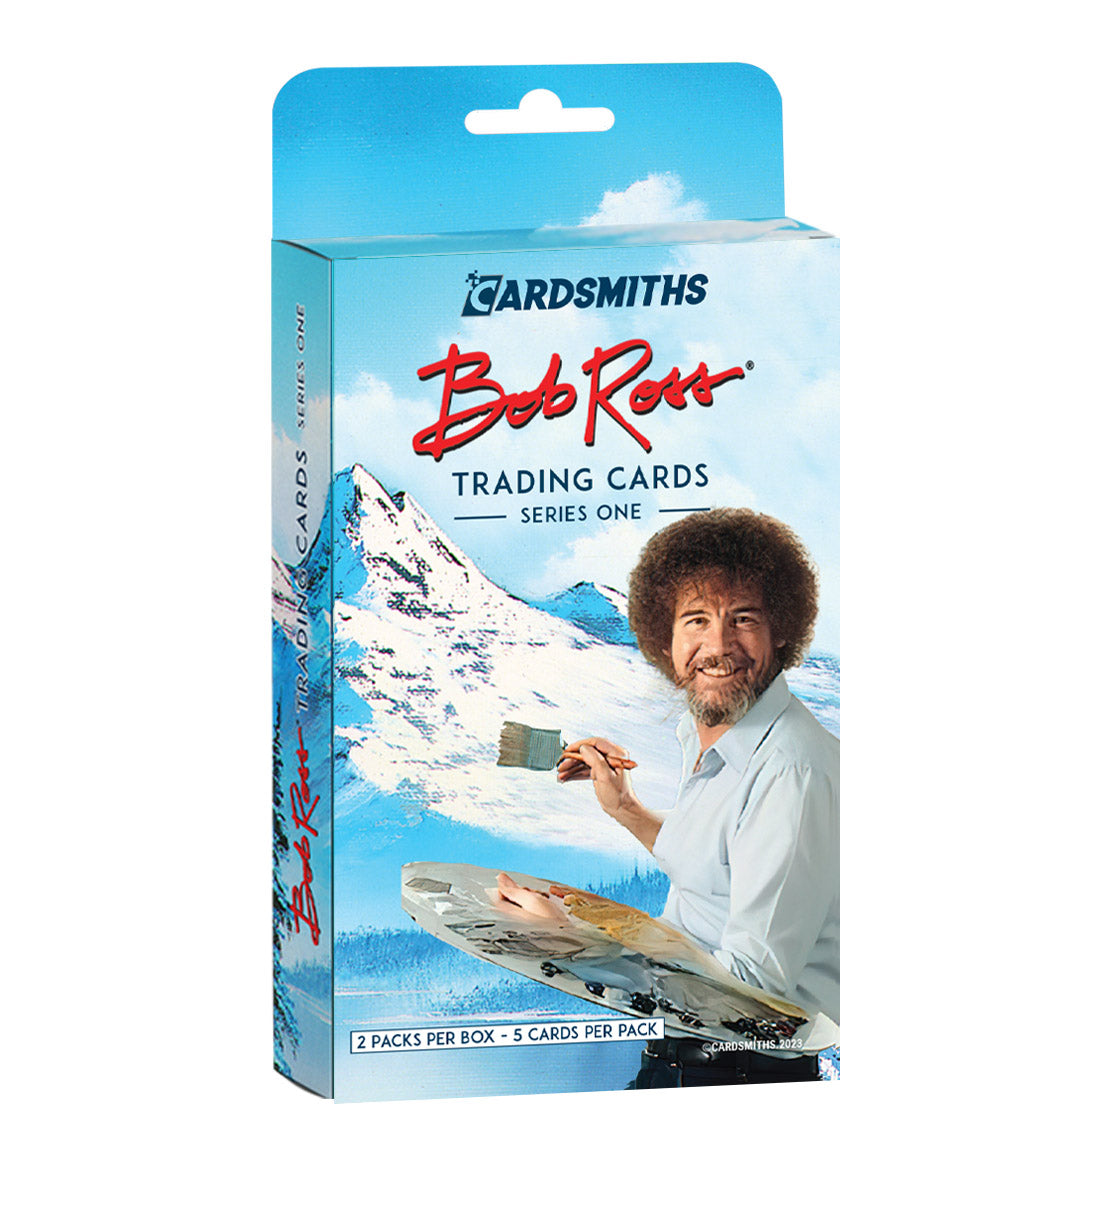 Cardsmiths: Bob Ross Trading Cards Series 1